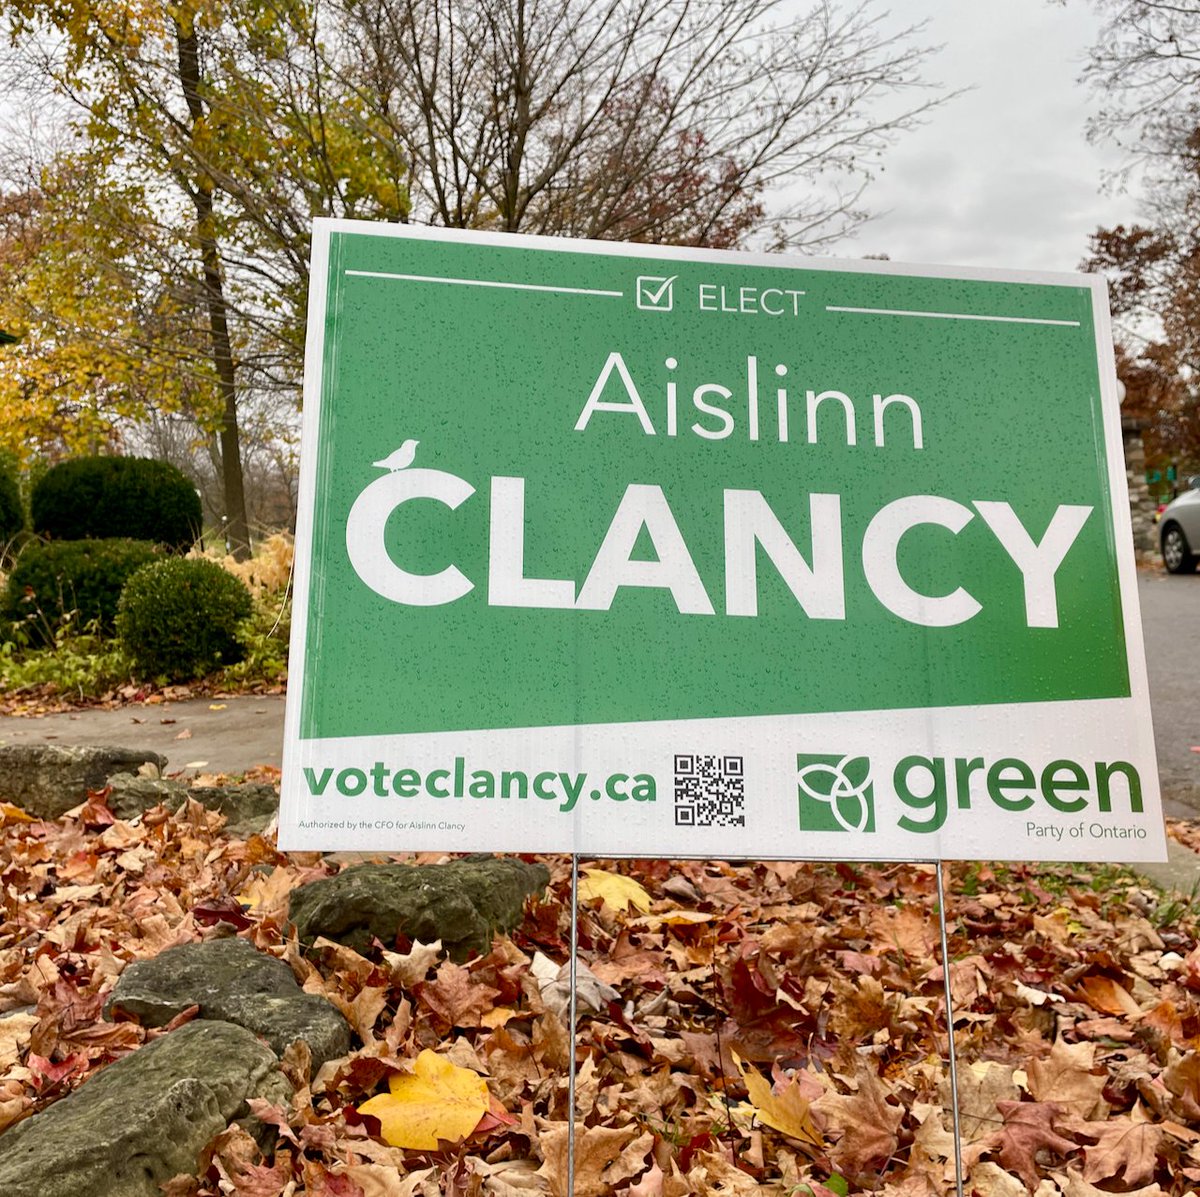 💚 If @morricemike is any indication of what Green Party politicians can do for #KitchenerCentre, Aislinn Clancy has my vote! #voteclancy2023 #ElecionDay is November 30th, with advanced polls: Nov. 22nd, 23rd, and 24th! @voteclancy @OntarioGreens voteclancy.ca